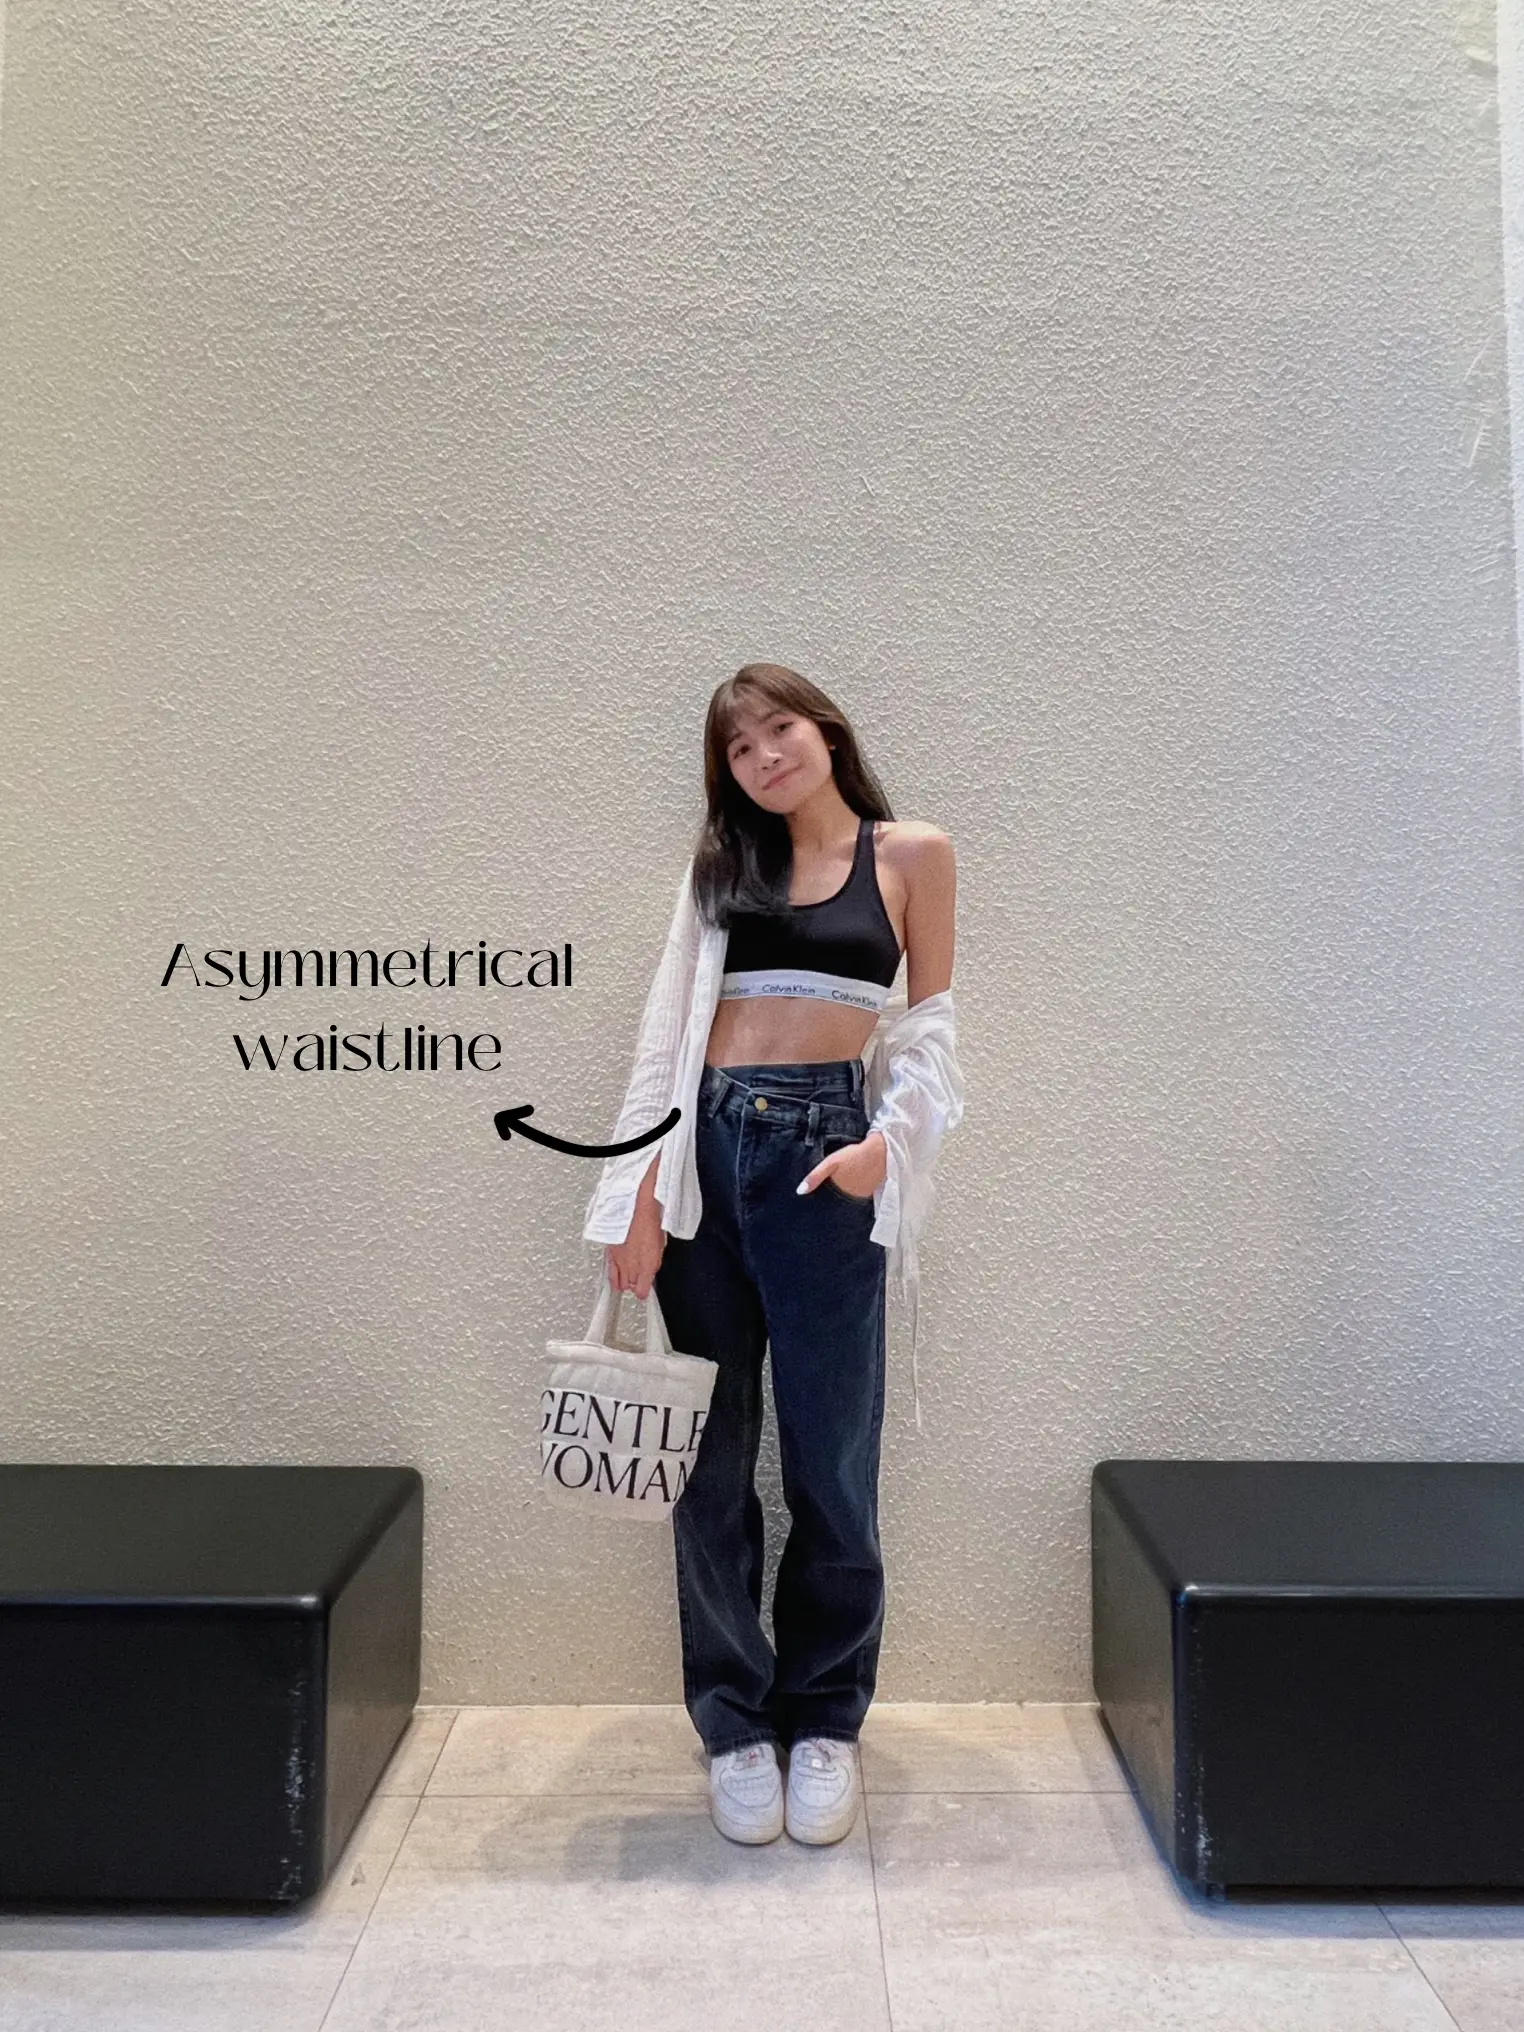 The perfect baggy jeans 👌🏼👌🏼 Museum date ootd!, Gallery posted by julia  ☁️